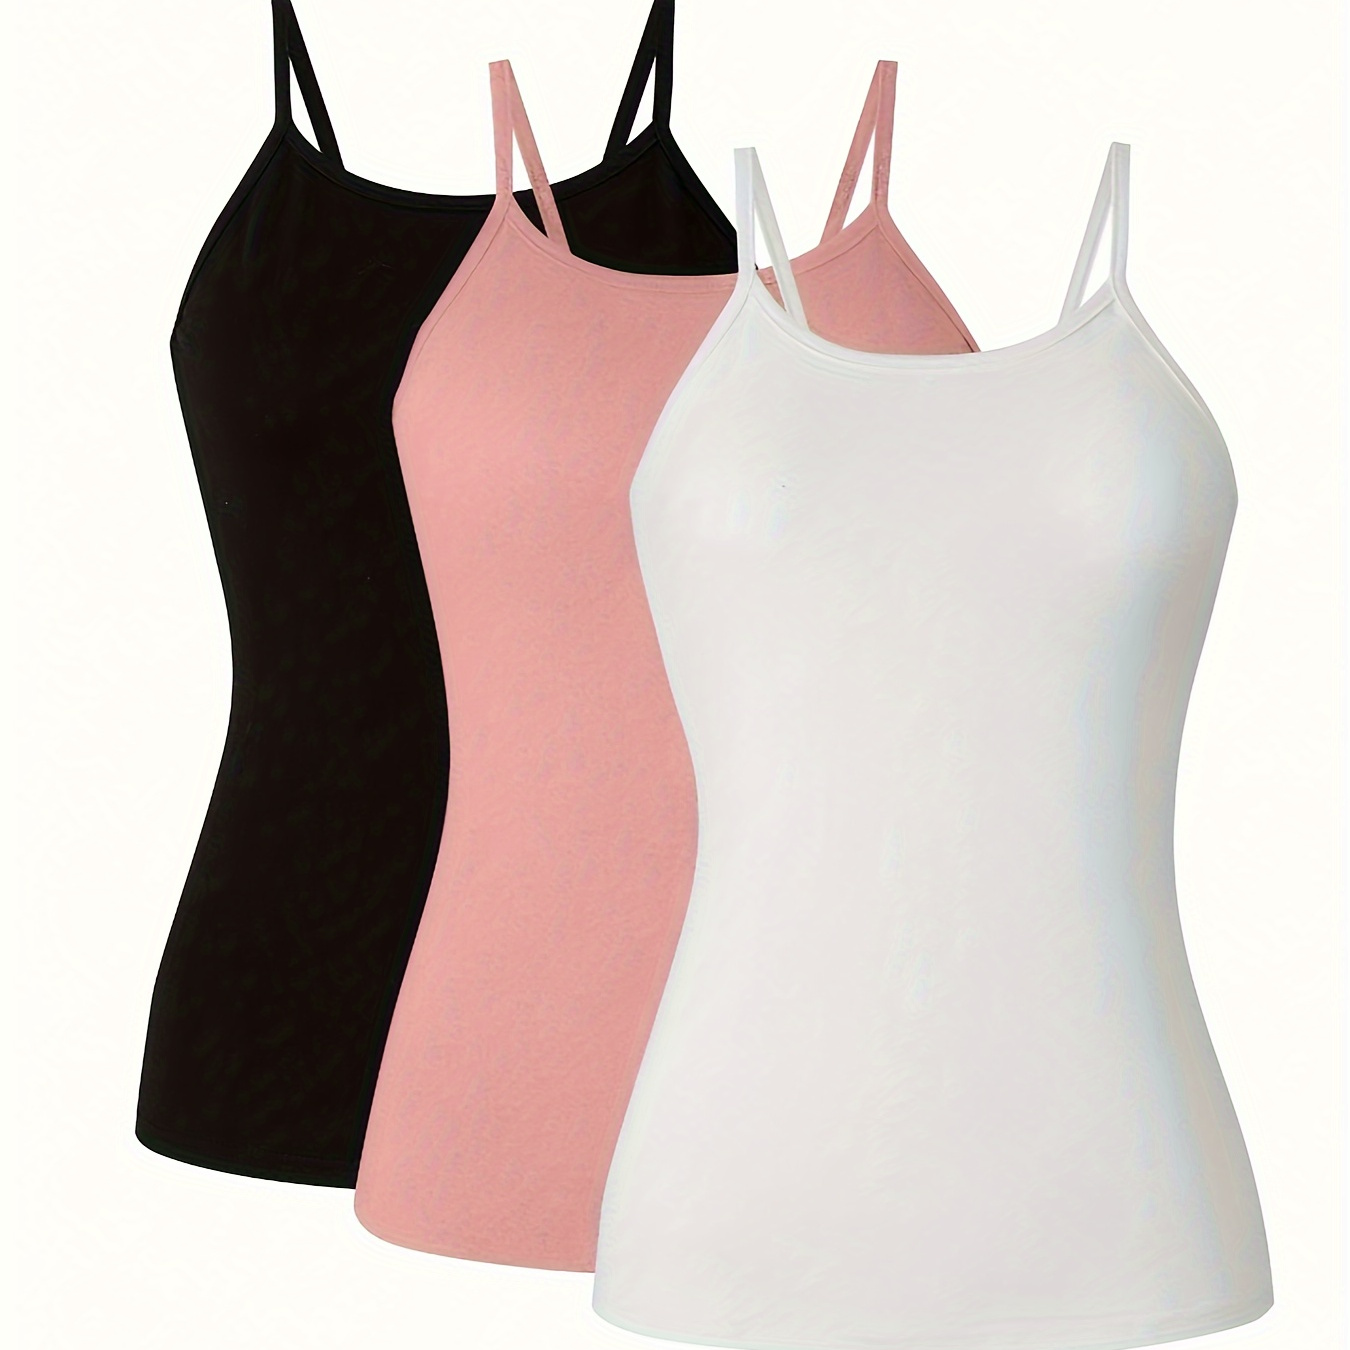 

3pcs Solid Color Spaghetti Strap Top, Elegant Sleeveless Cami Top For Spring & Summer, Women's Clothing